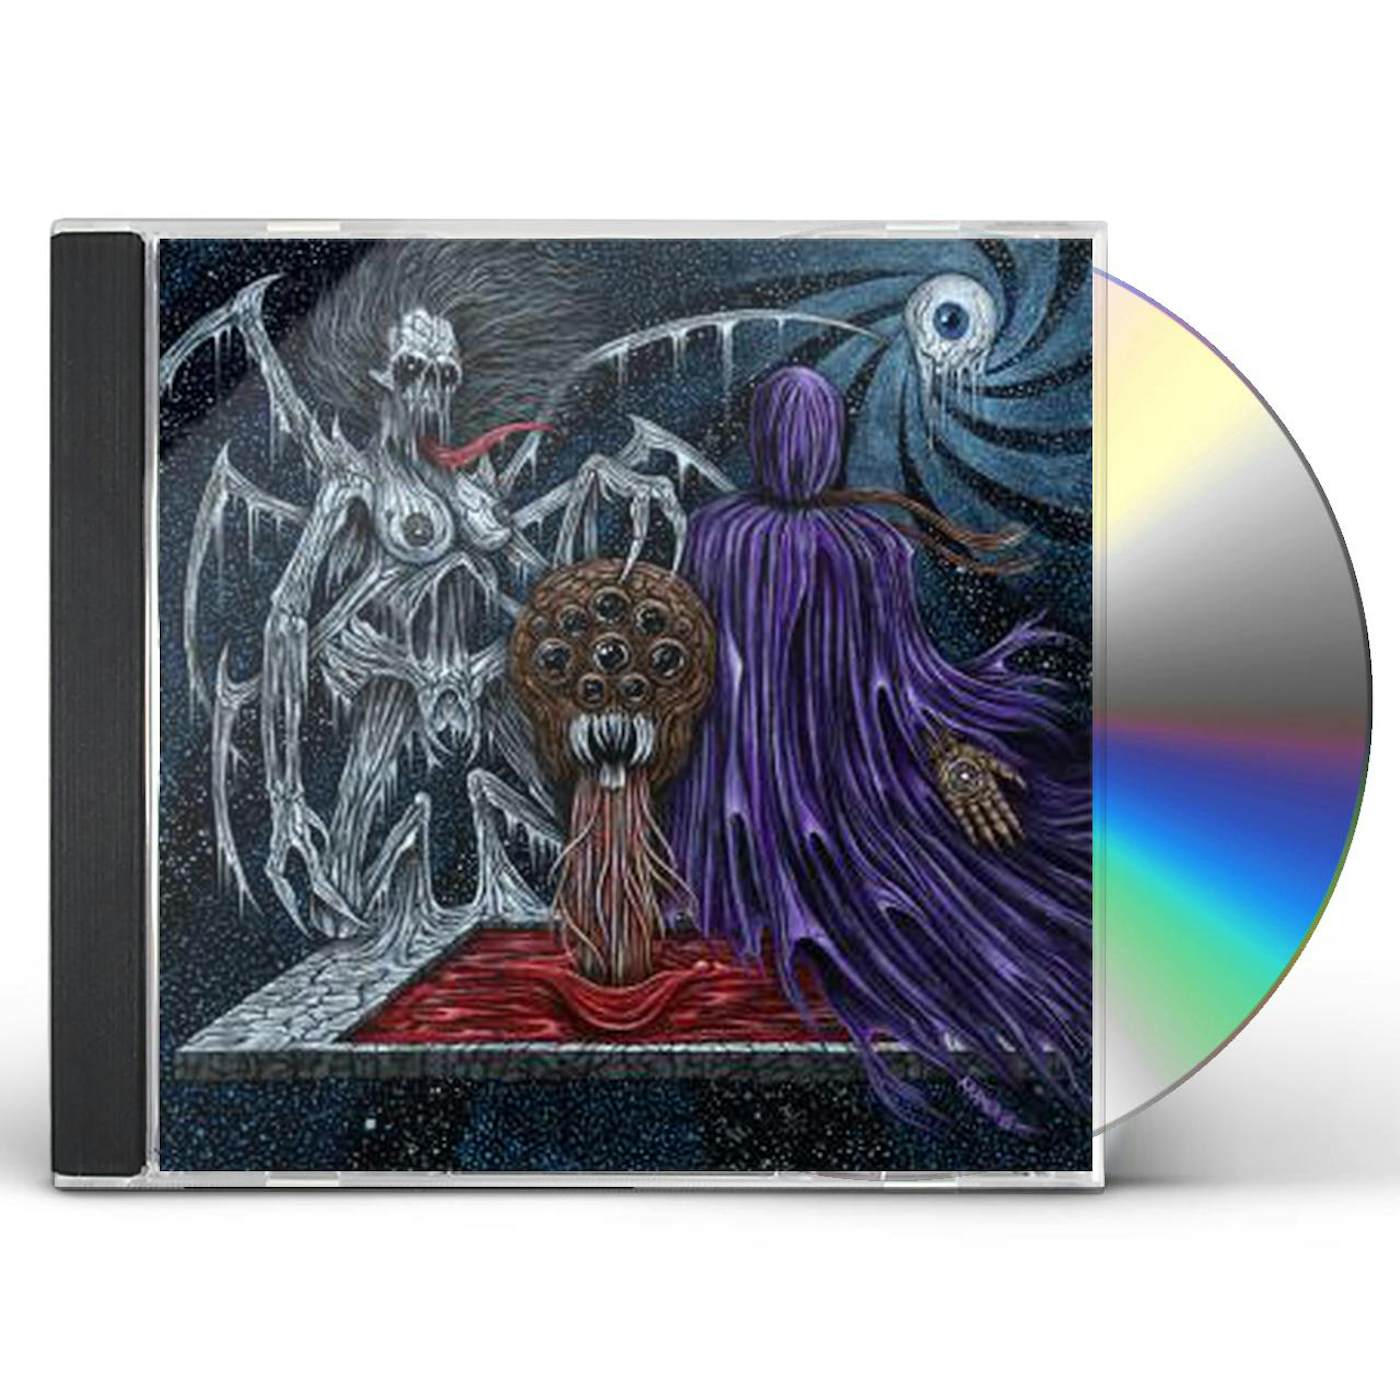 Vasaeleth ALL UPROARIOUS DARKNESS CD